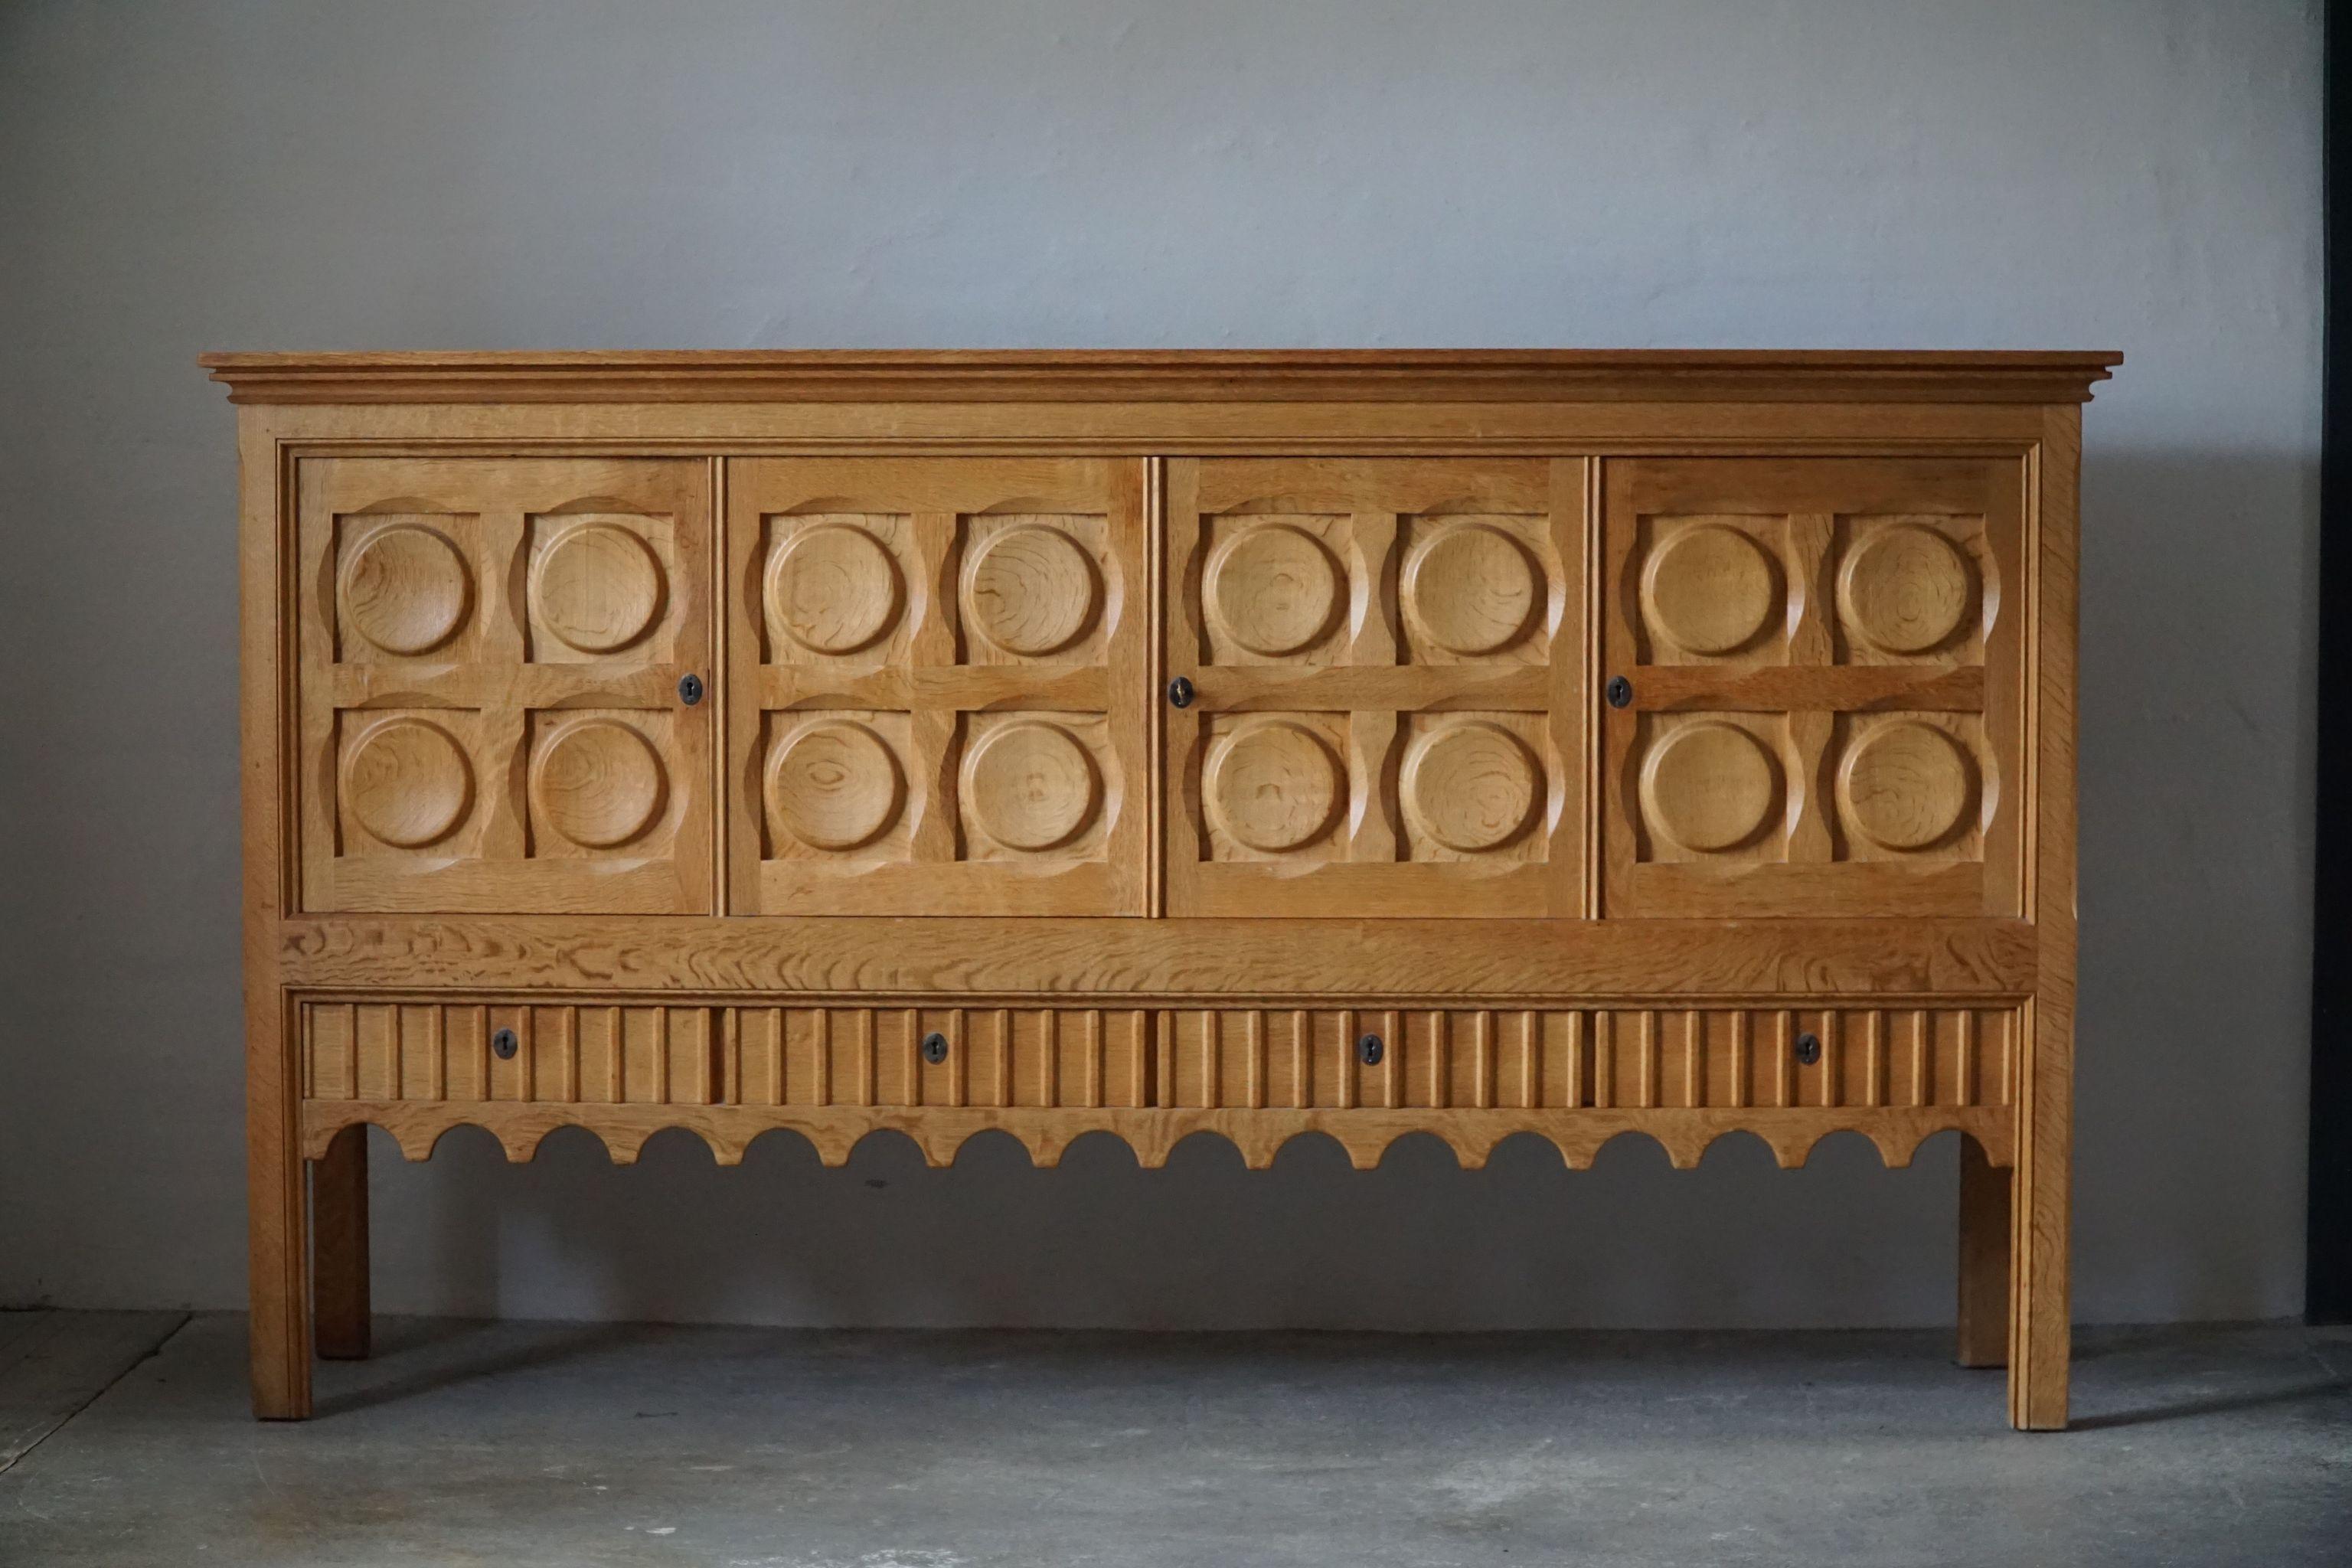 Rectangular classic sideboard in solid oak with plenty of storage. Made by a Danish cabinetmaker in ca 1950s. A nice carved front design.
This piece is in a good vintage condition. Traces of wear.

A fine brutalist object that fits in many